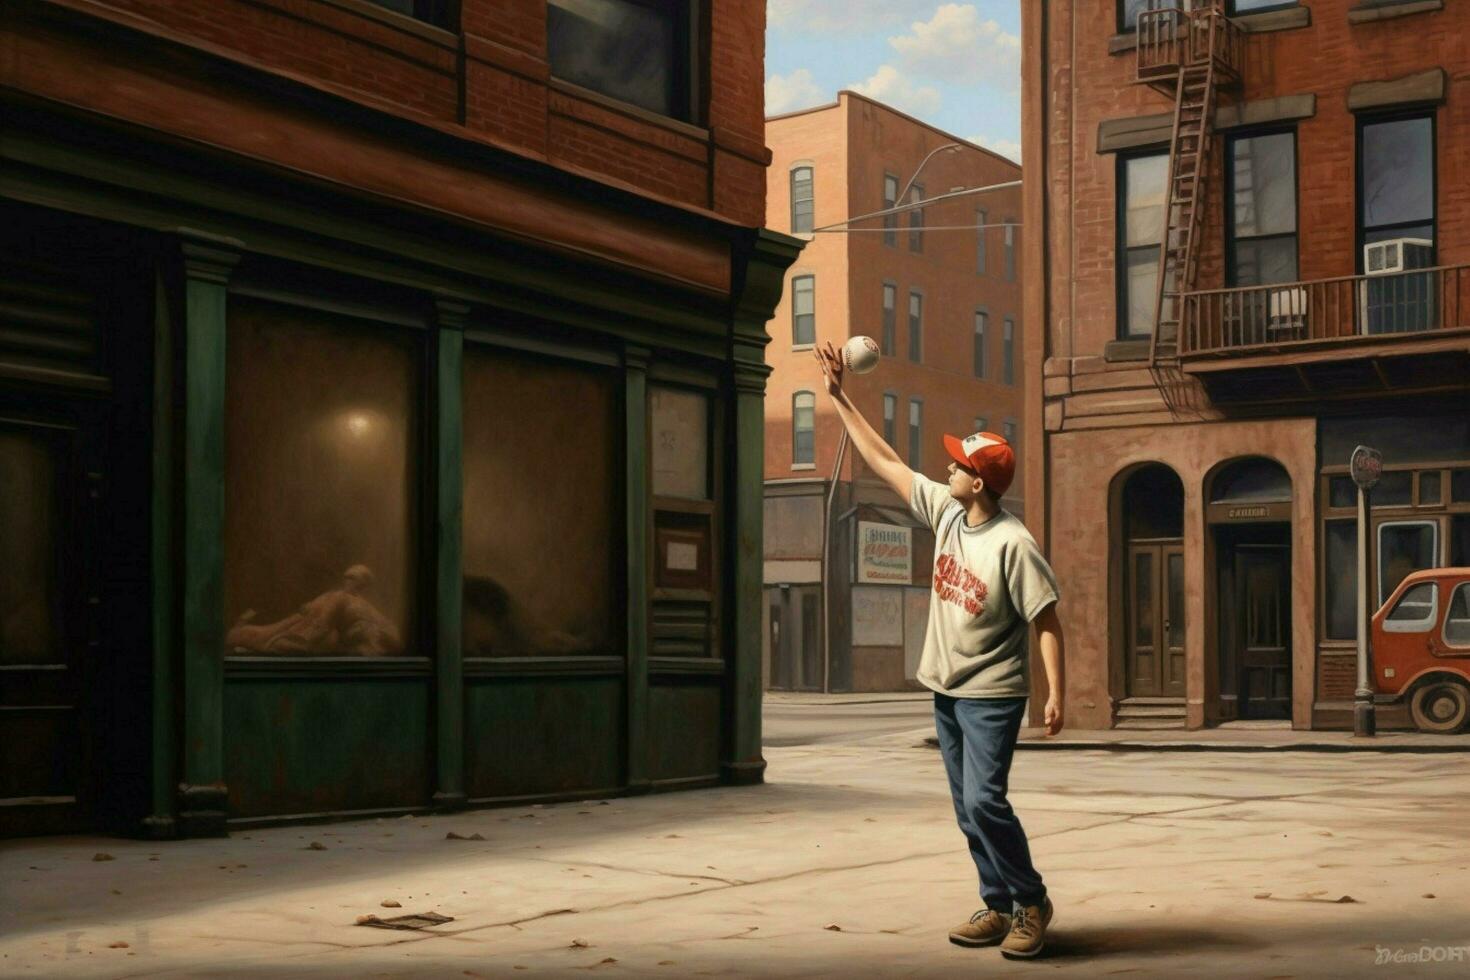 Playing catch with a baseball photo